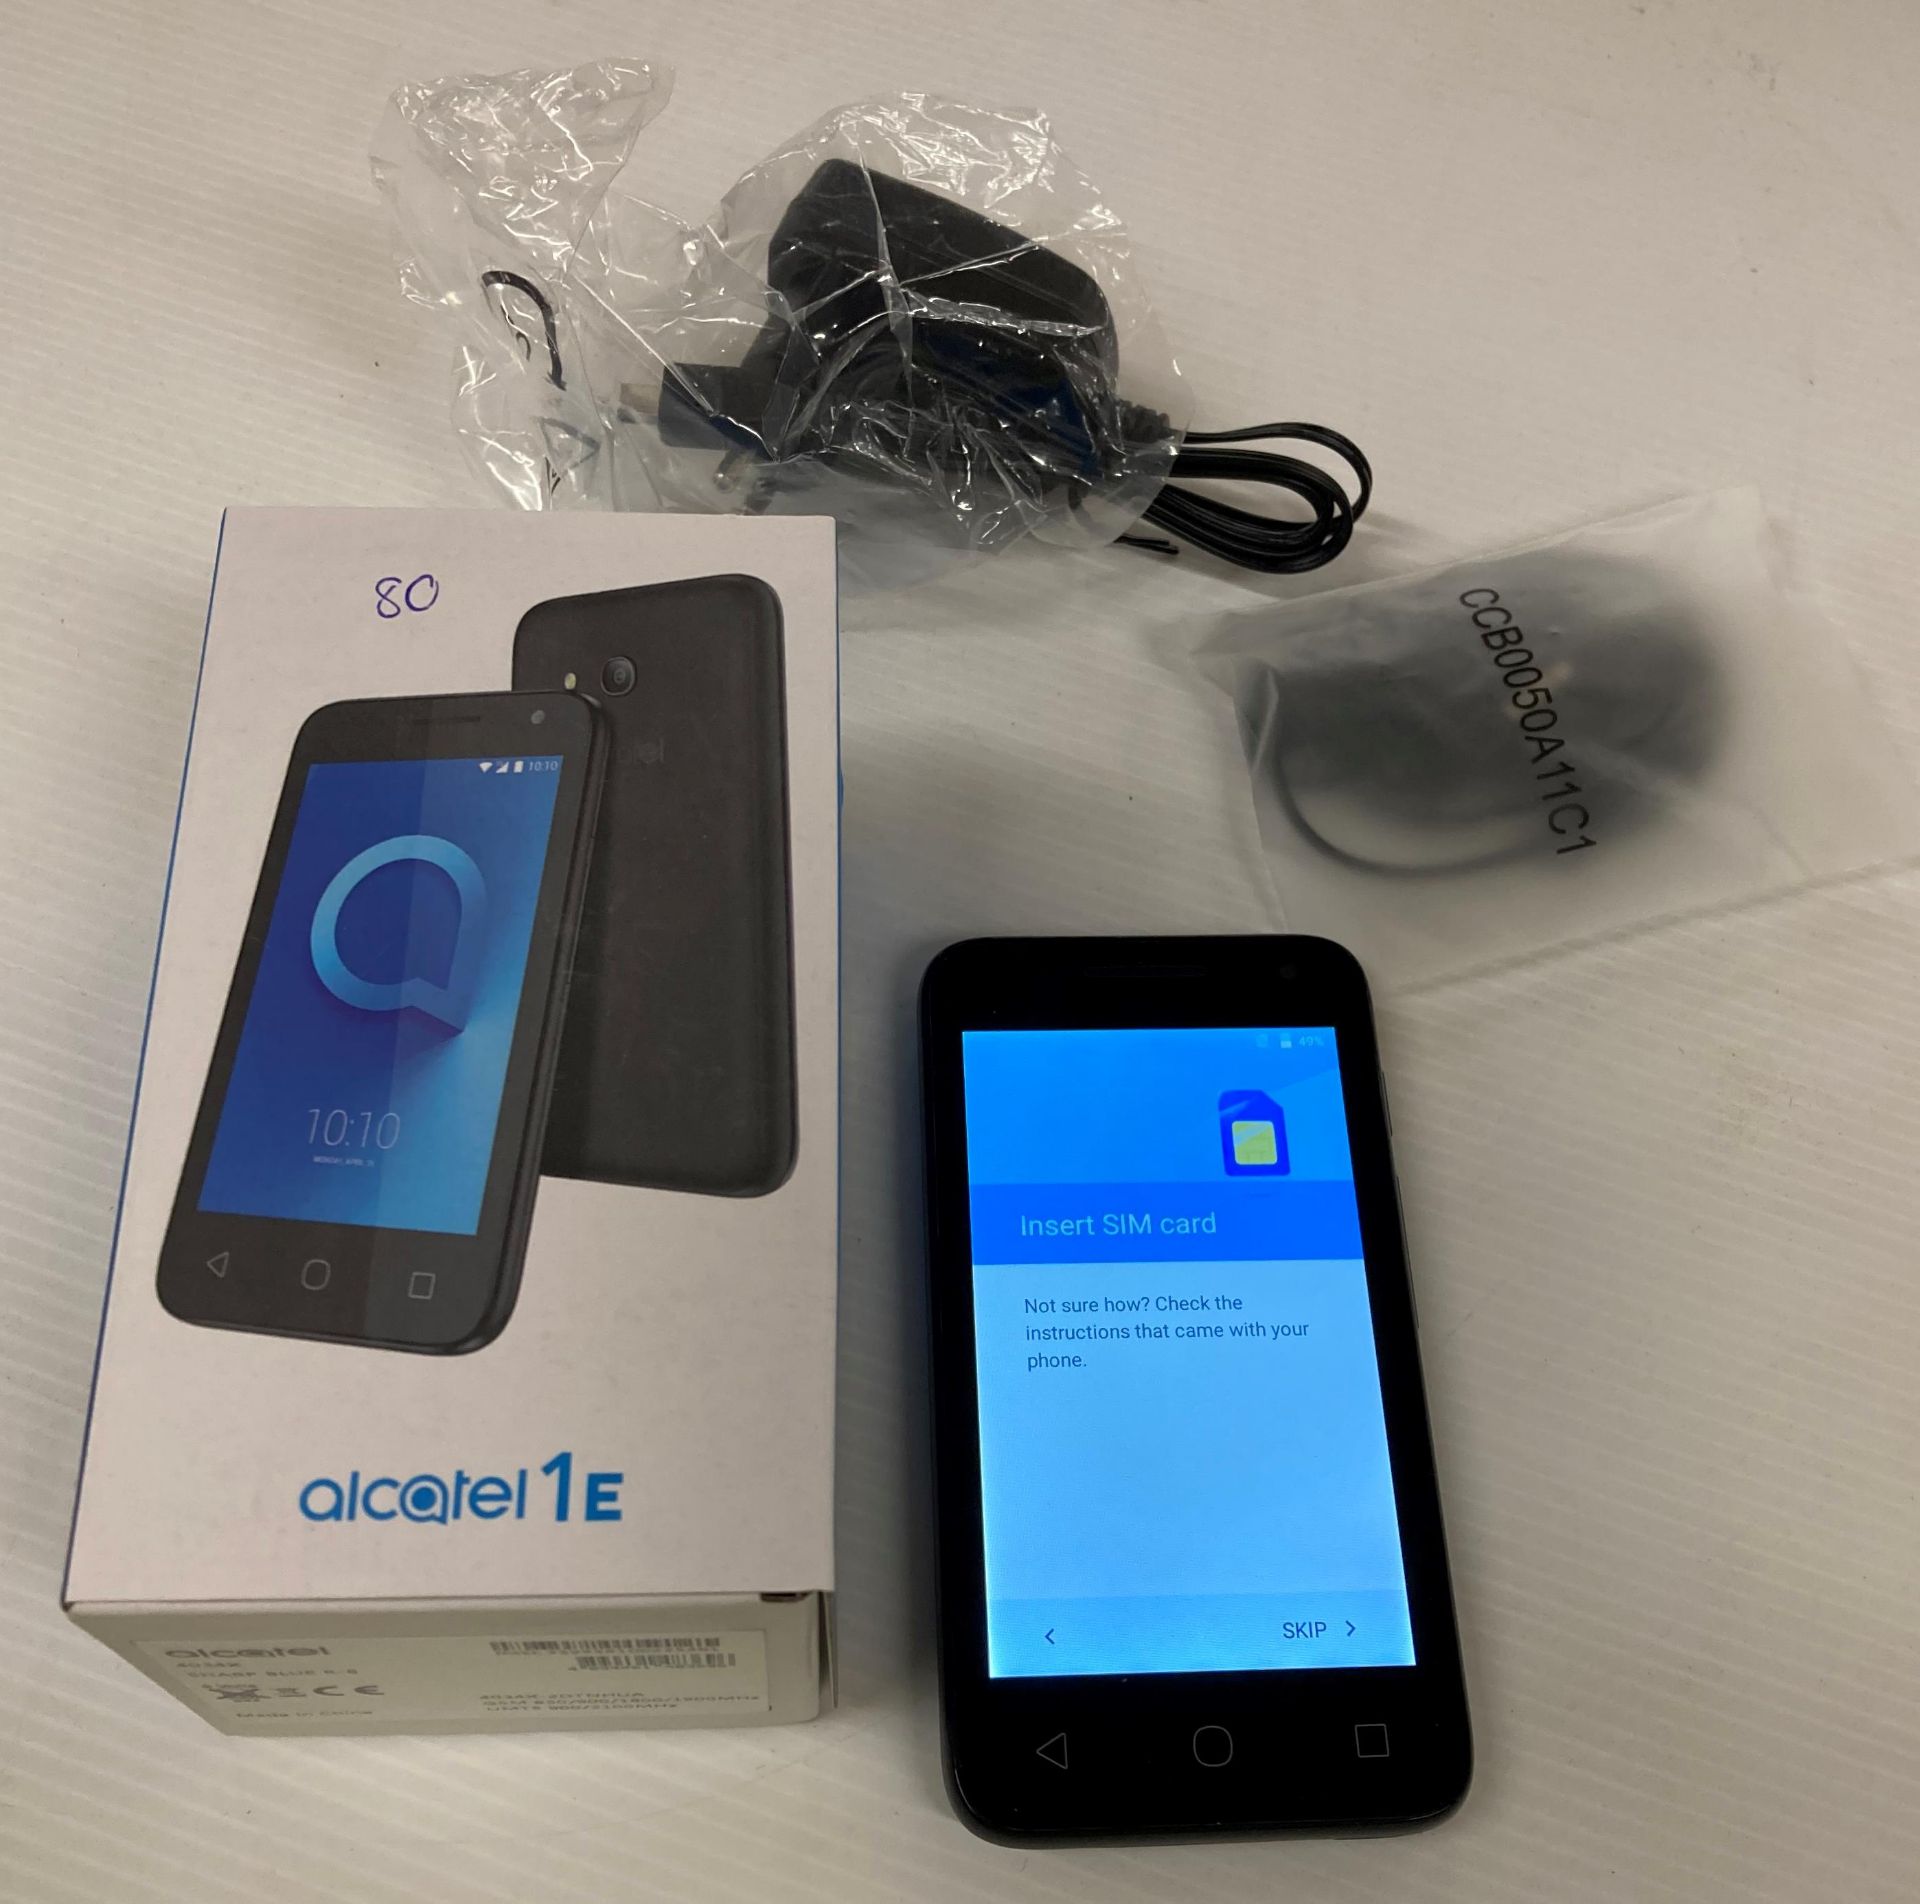 6 x Alcatel 1E Mobile Phones - some may not have chargers (Saleroom location: G07)